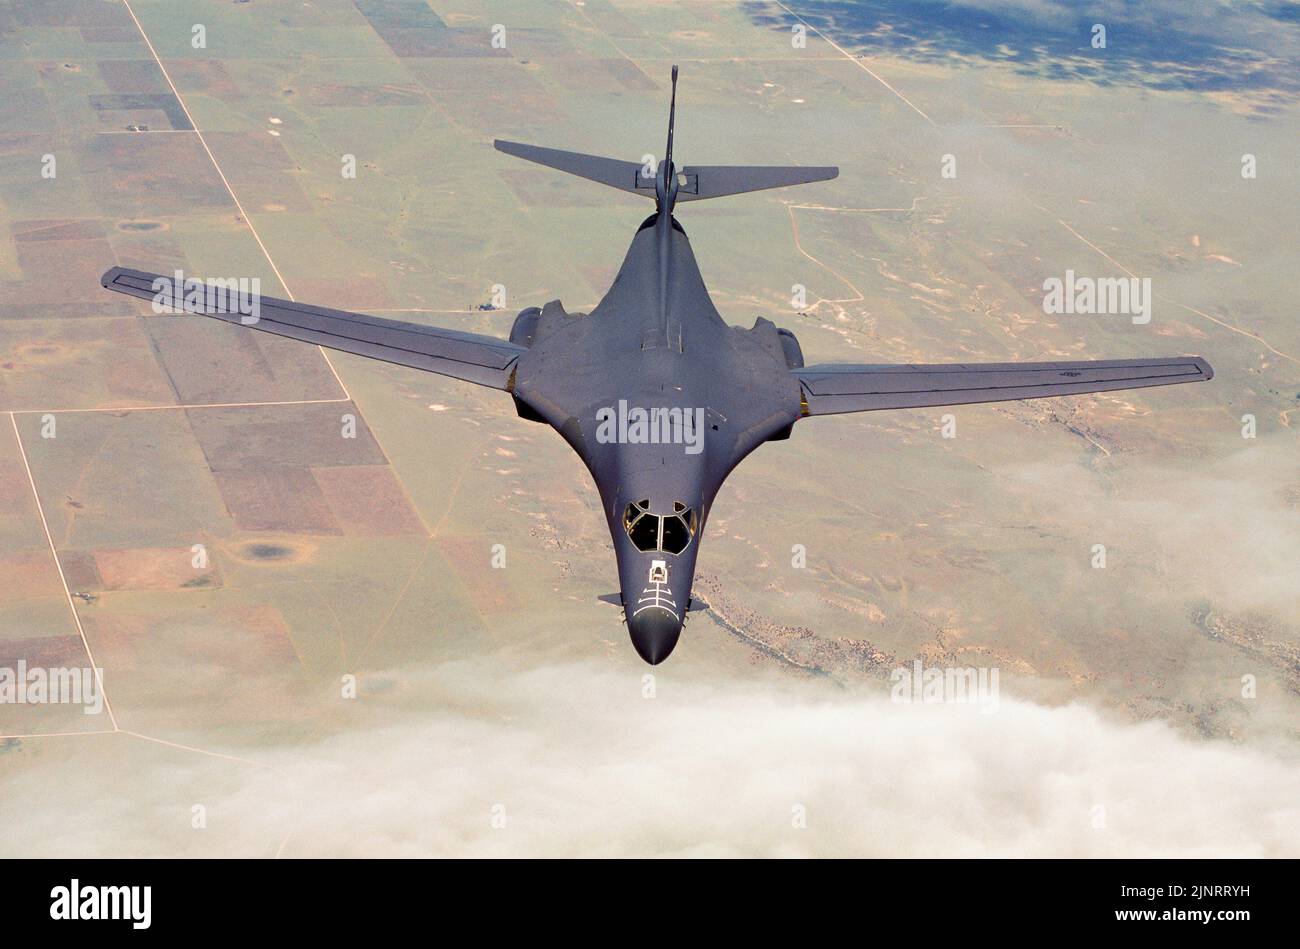 US Air Force B-1 bomber on a training mission over the midwestern United States. Stock Photo